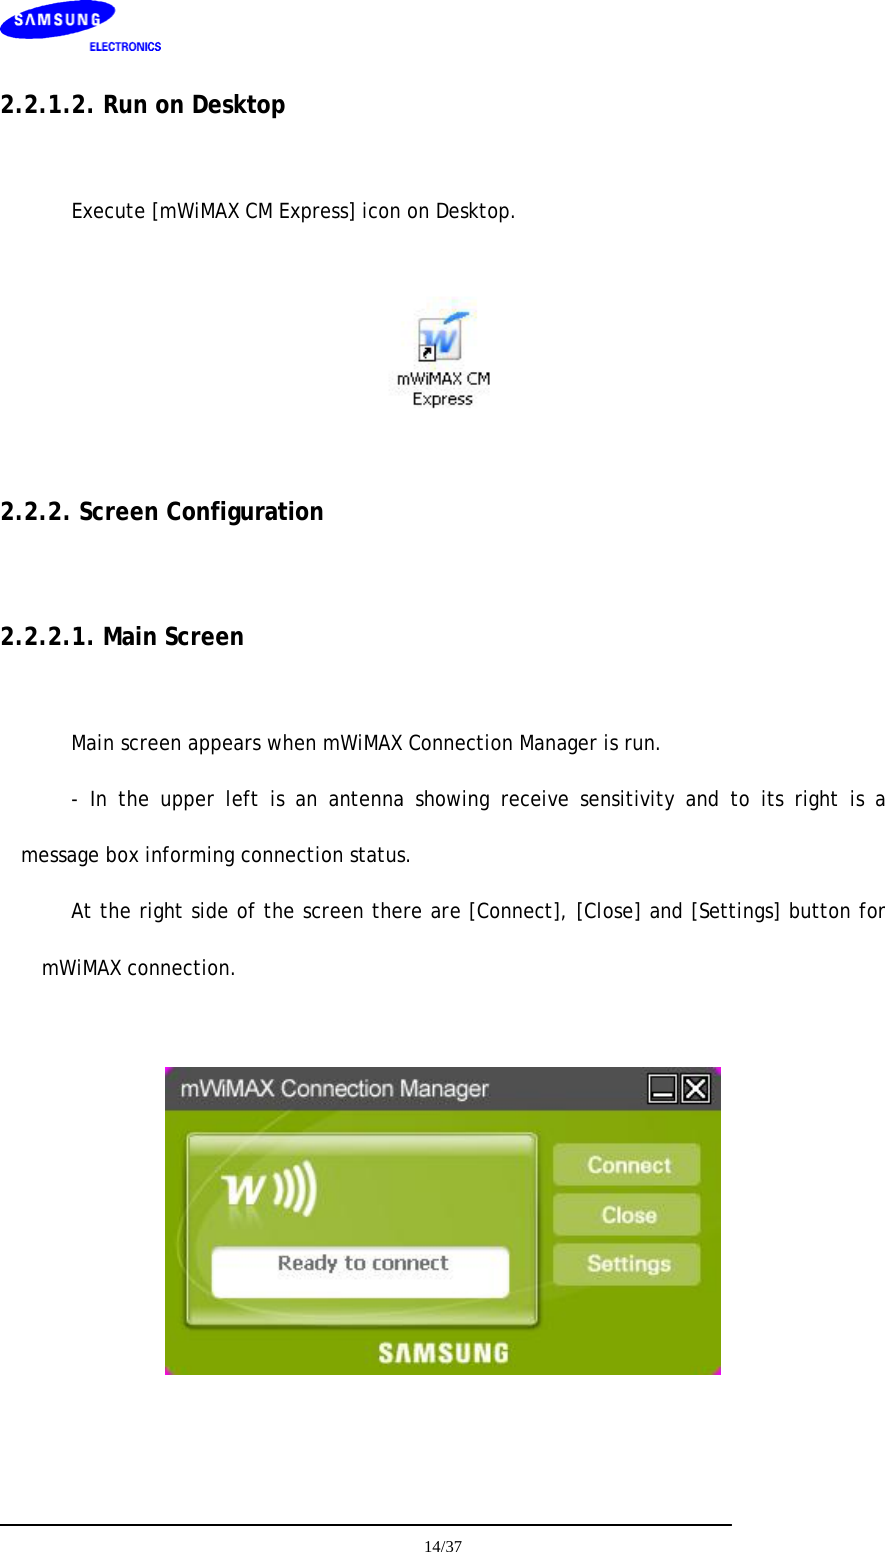    2.2.1.2. Run on Desktop  Execute [mWiMAX CM Express] icon on Desktop.    2.2.2. Screen Configuration  2.2.2.1. Main Screen  Main screen appears when mWiMAX Connection Manager is run. - In the upper left is an antenna showing receive sensitivity and to its right is a message box informing connection status.  At the right side of the screen there are [Connect], [Close] and [Settings] button for mWiMAX connection.     14/37  